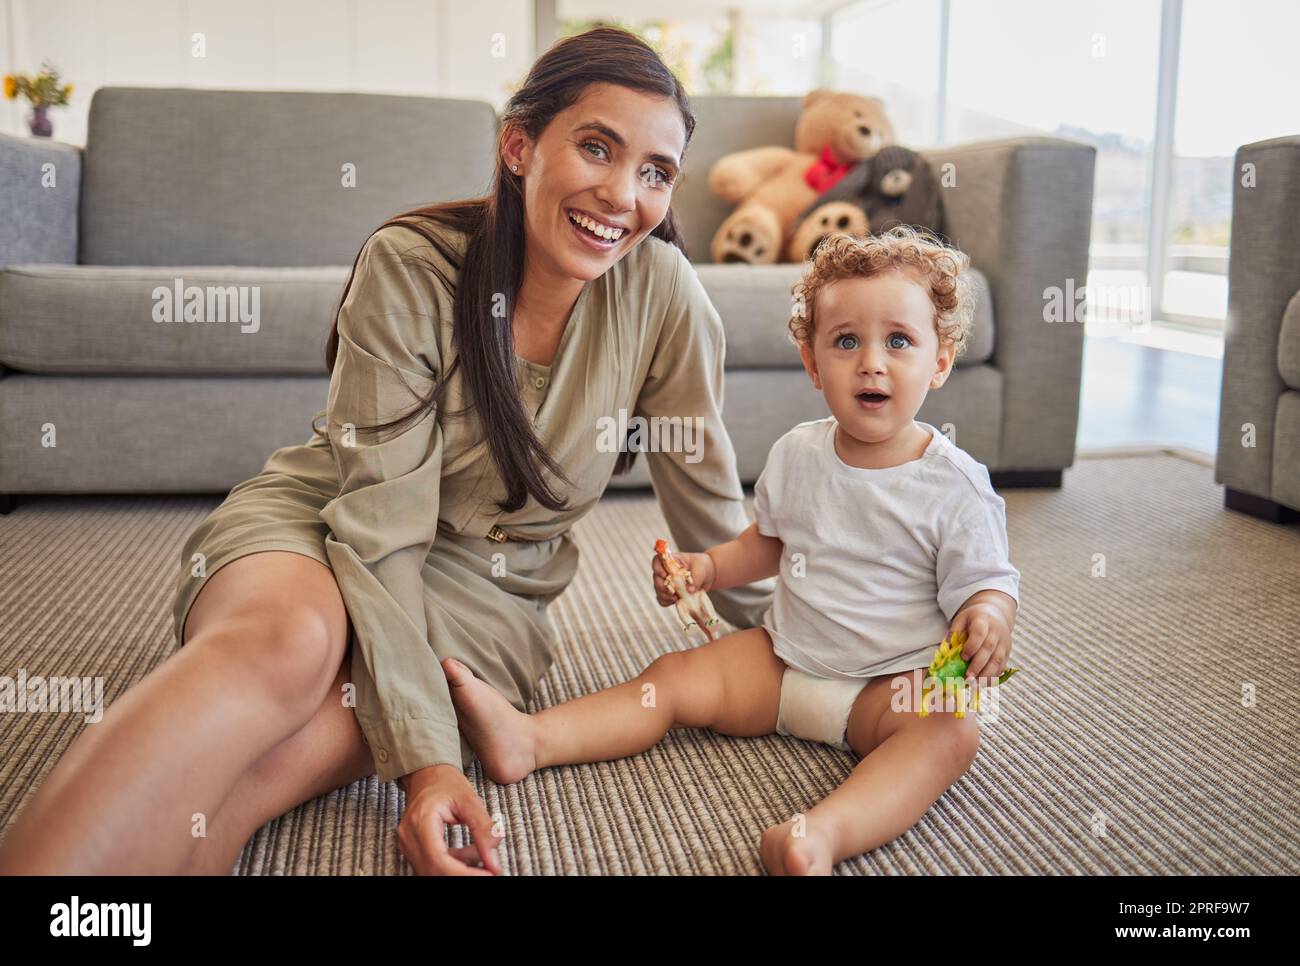 Mother, baby and smile in living room playing together on carpet in home, for fun and learning with toys. Child, mom and floor with dinosaurs figure, Stock Photo